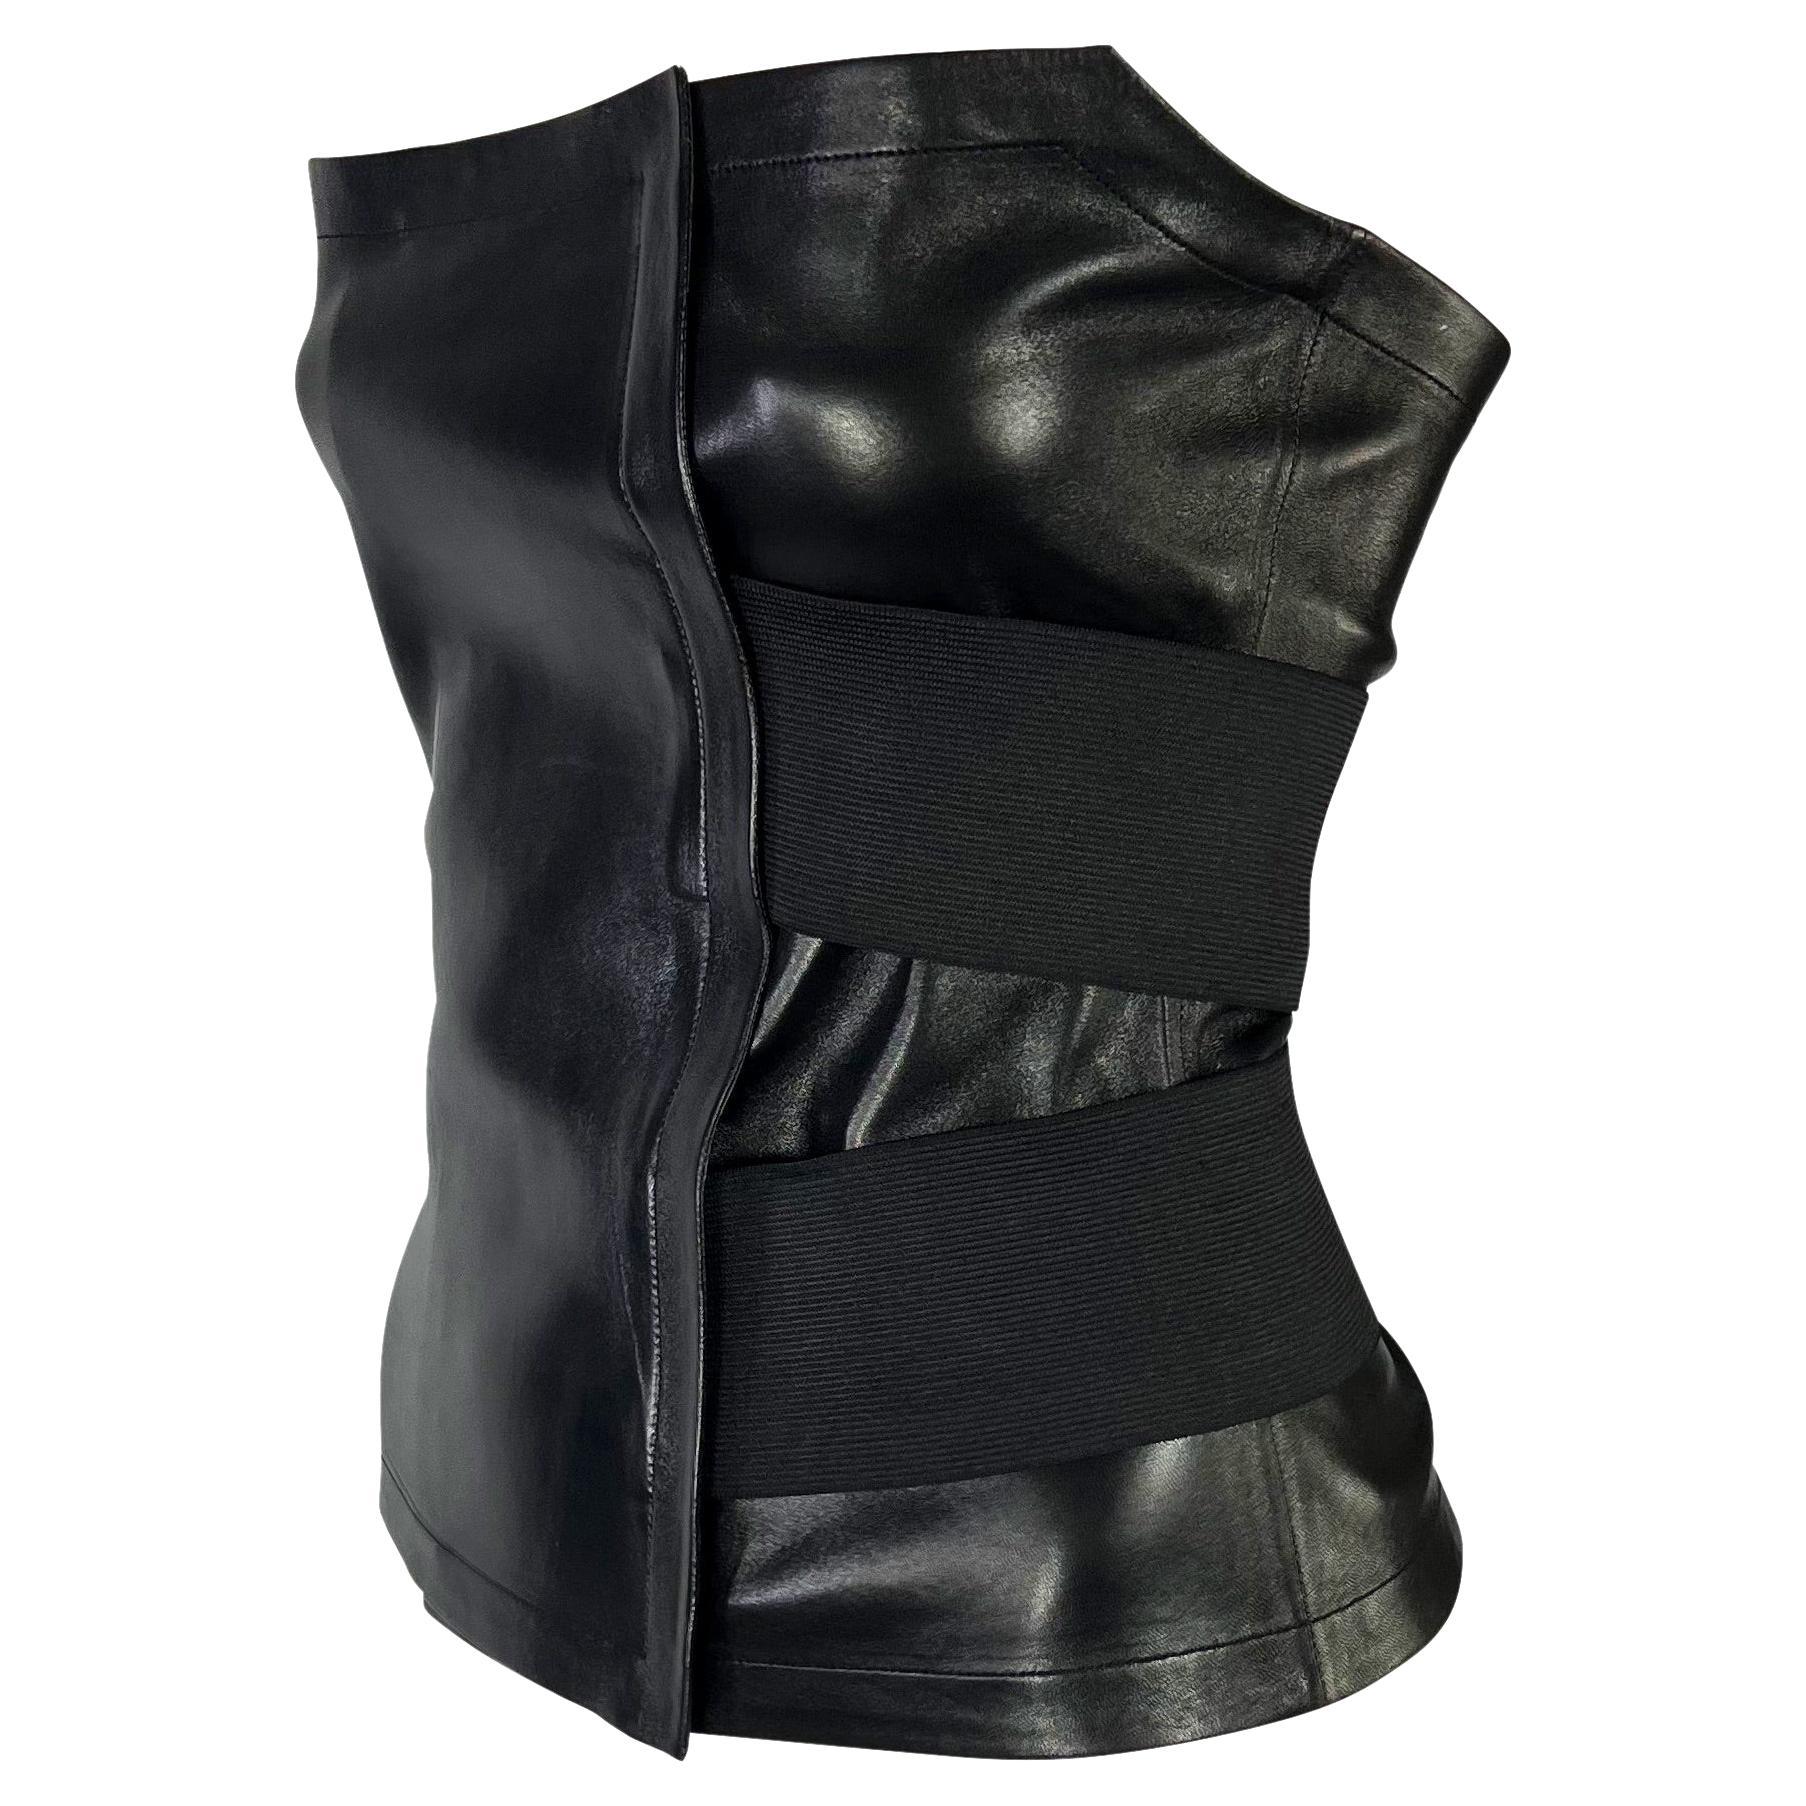 NWT S/S 2001 Yves Saint Laurent by Tom Ford Black Leather Bandage Strap Bustier For Sale